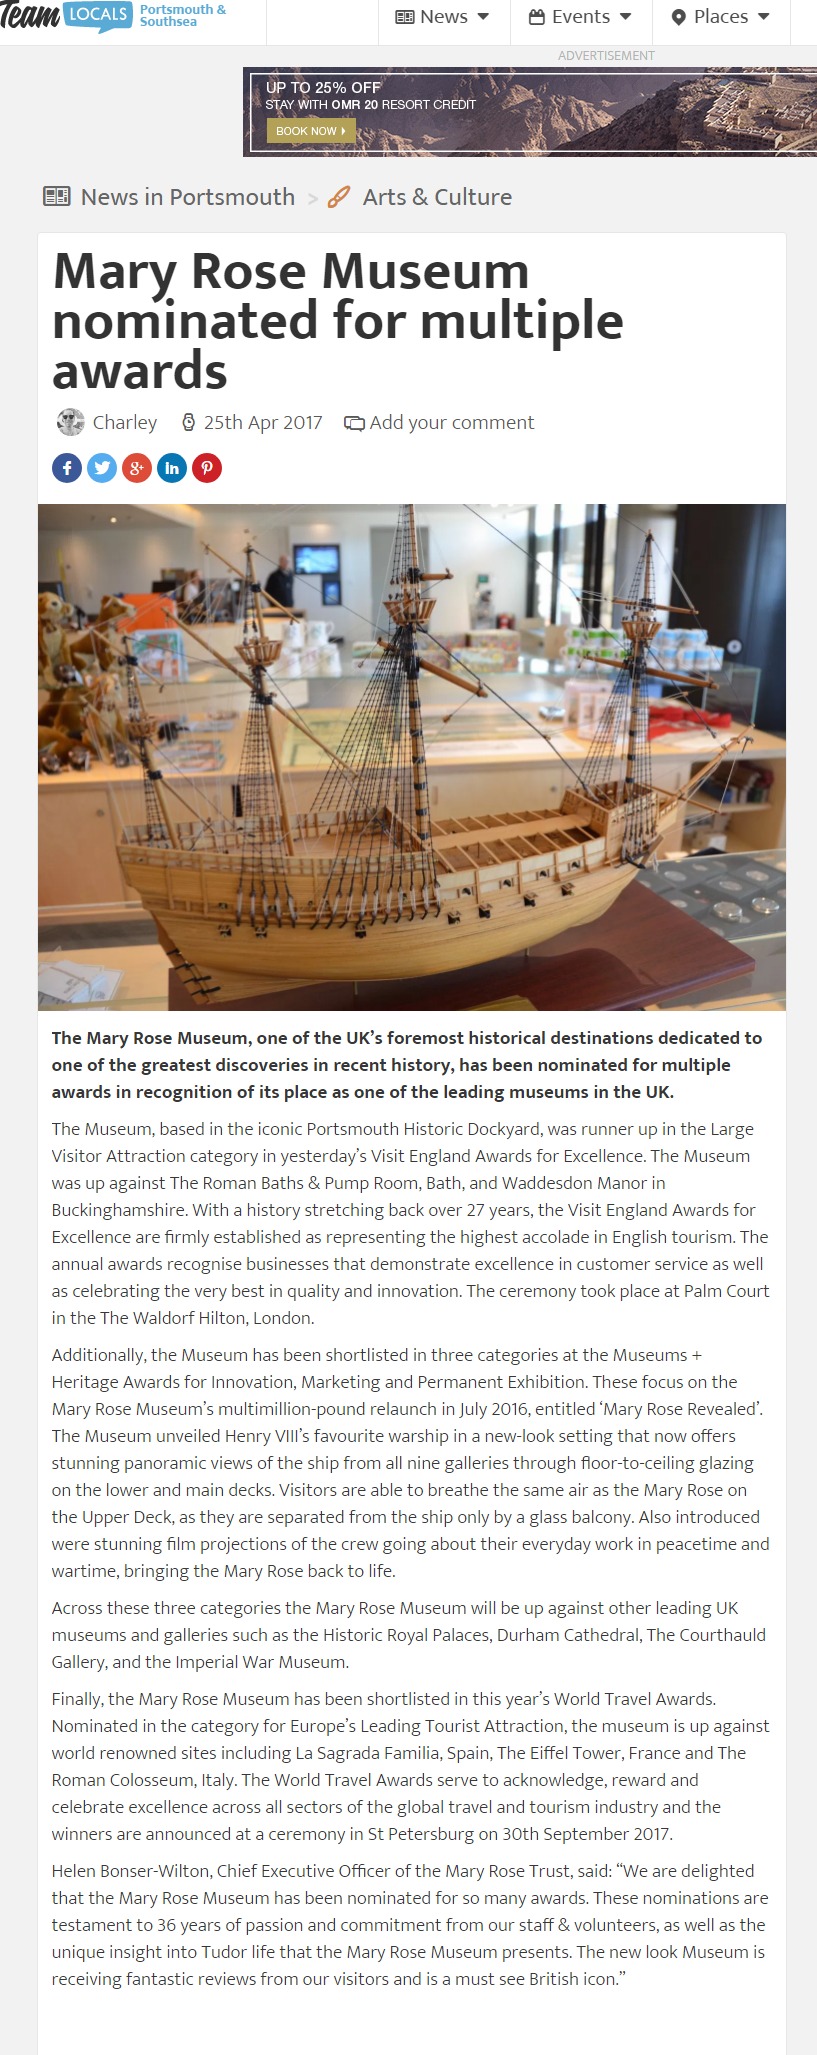 Mary Rose Museum nominated for multiple awards